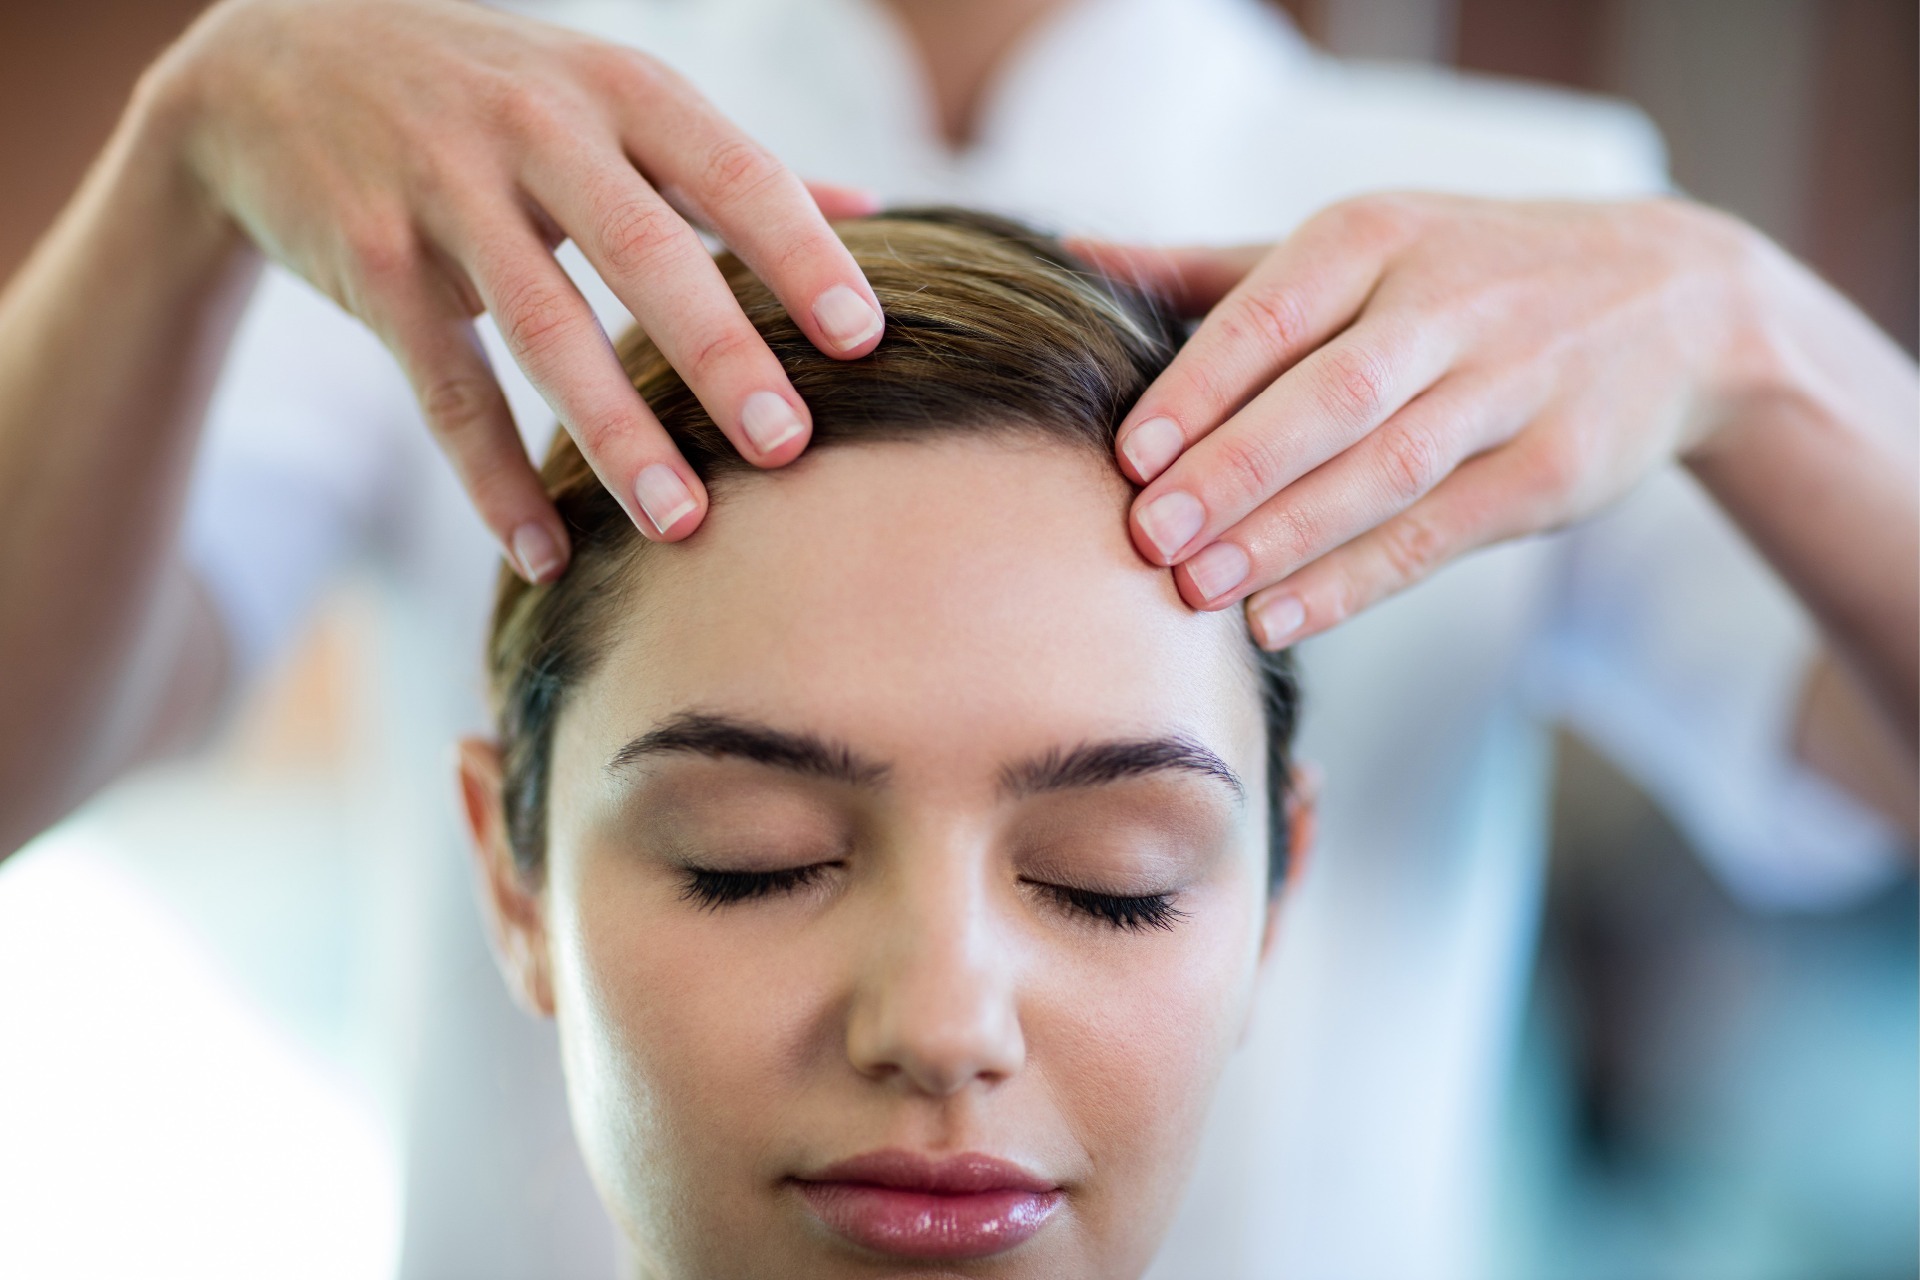 Indian Head Massage, Online training, learn something new